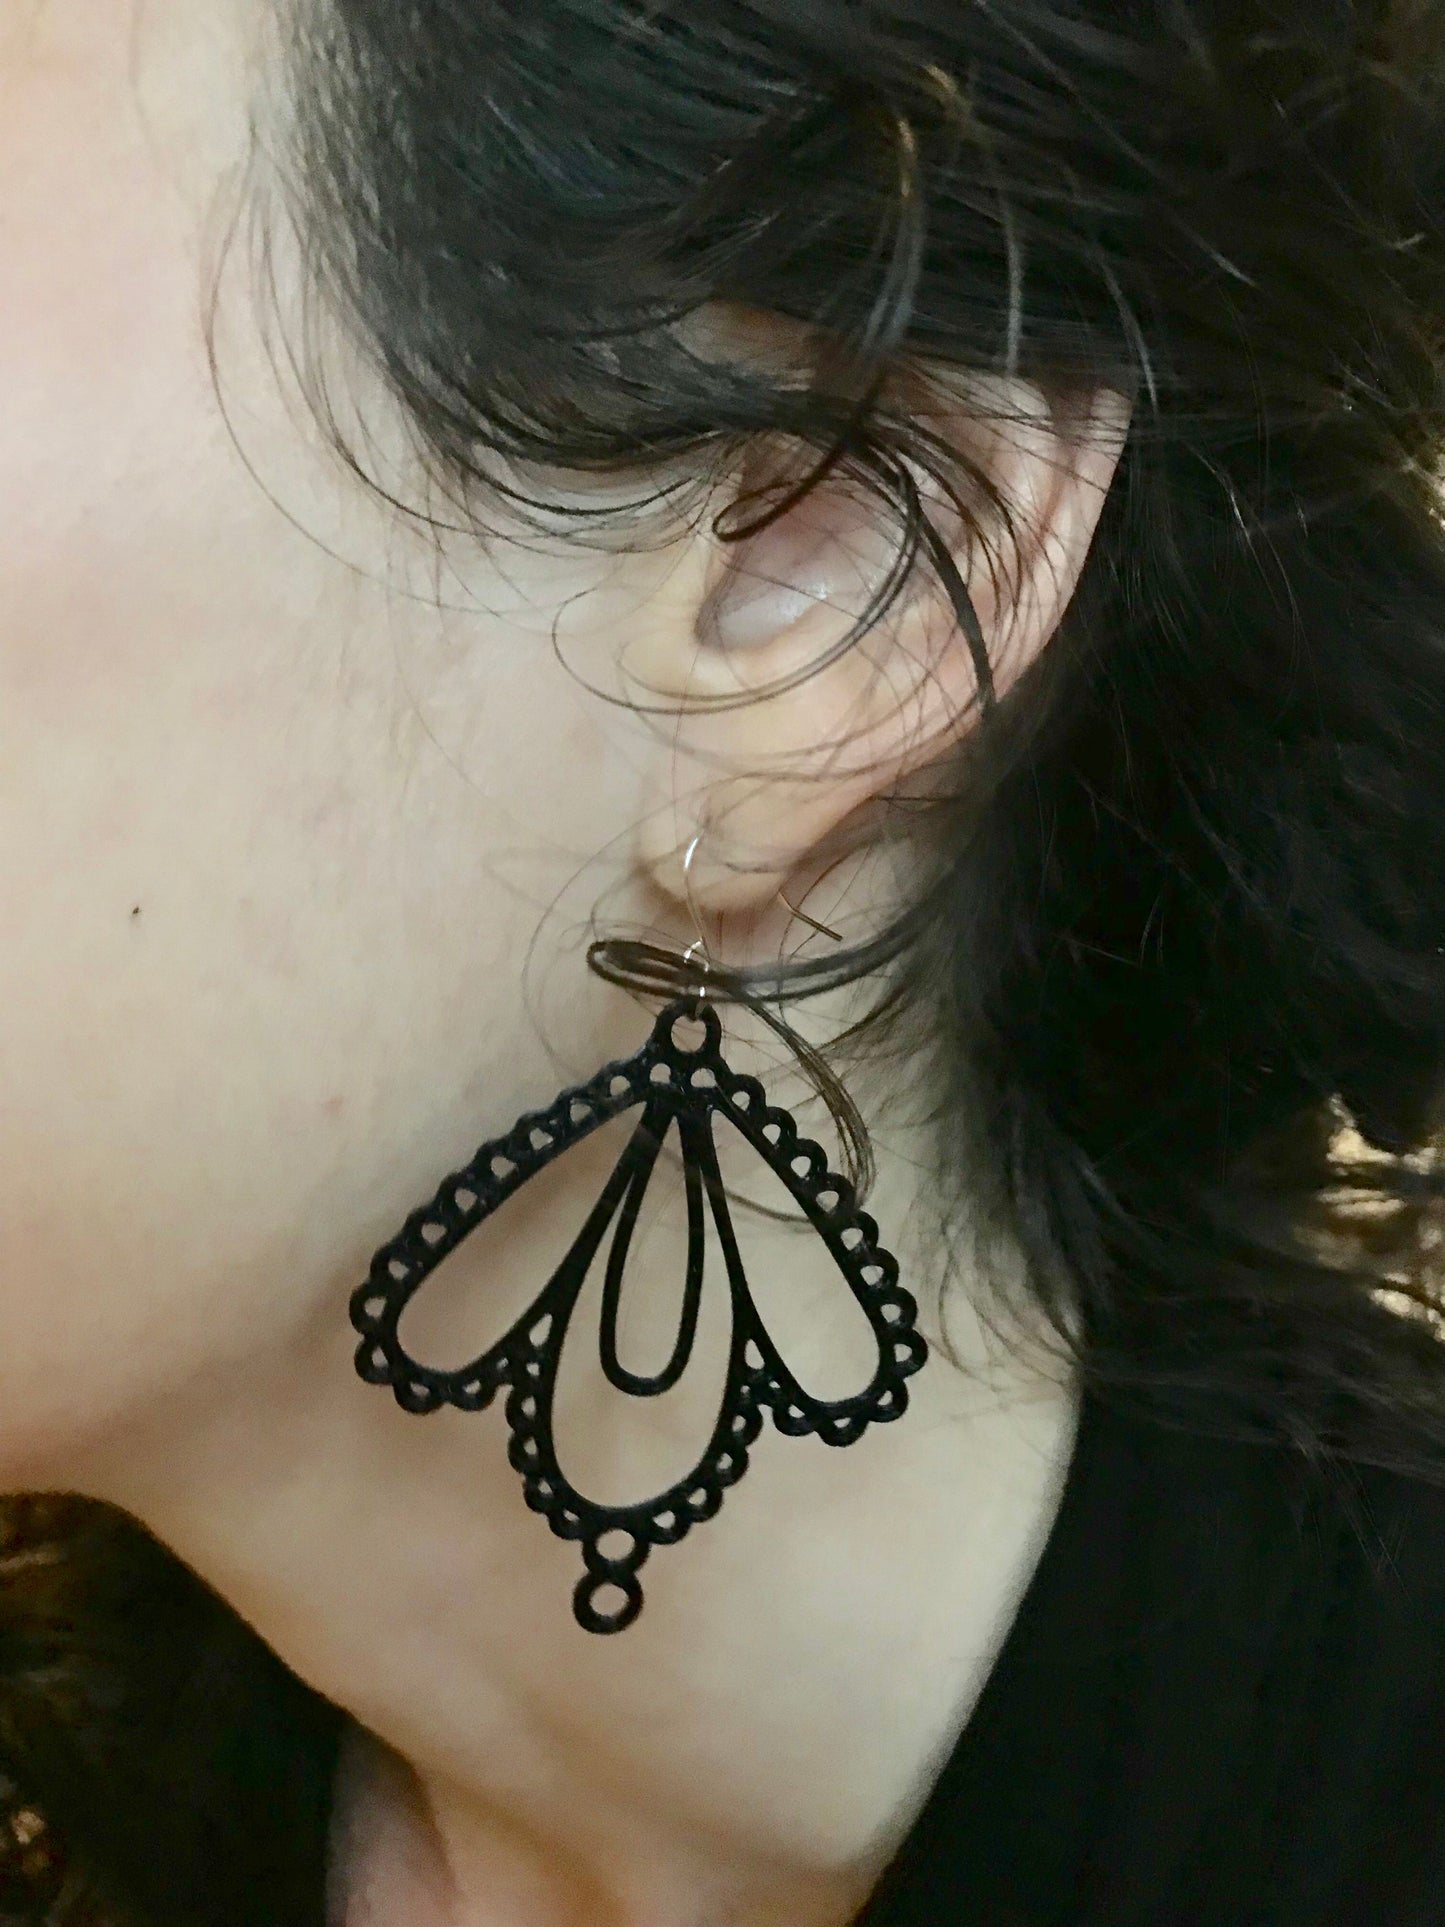 A close up of a woman with curly hair's ear and the black earring she is modeling. The earring  has multiple tear drop shapes that are accented with more circles and loops to look like lace.